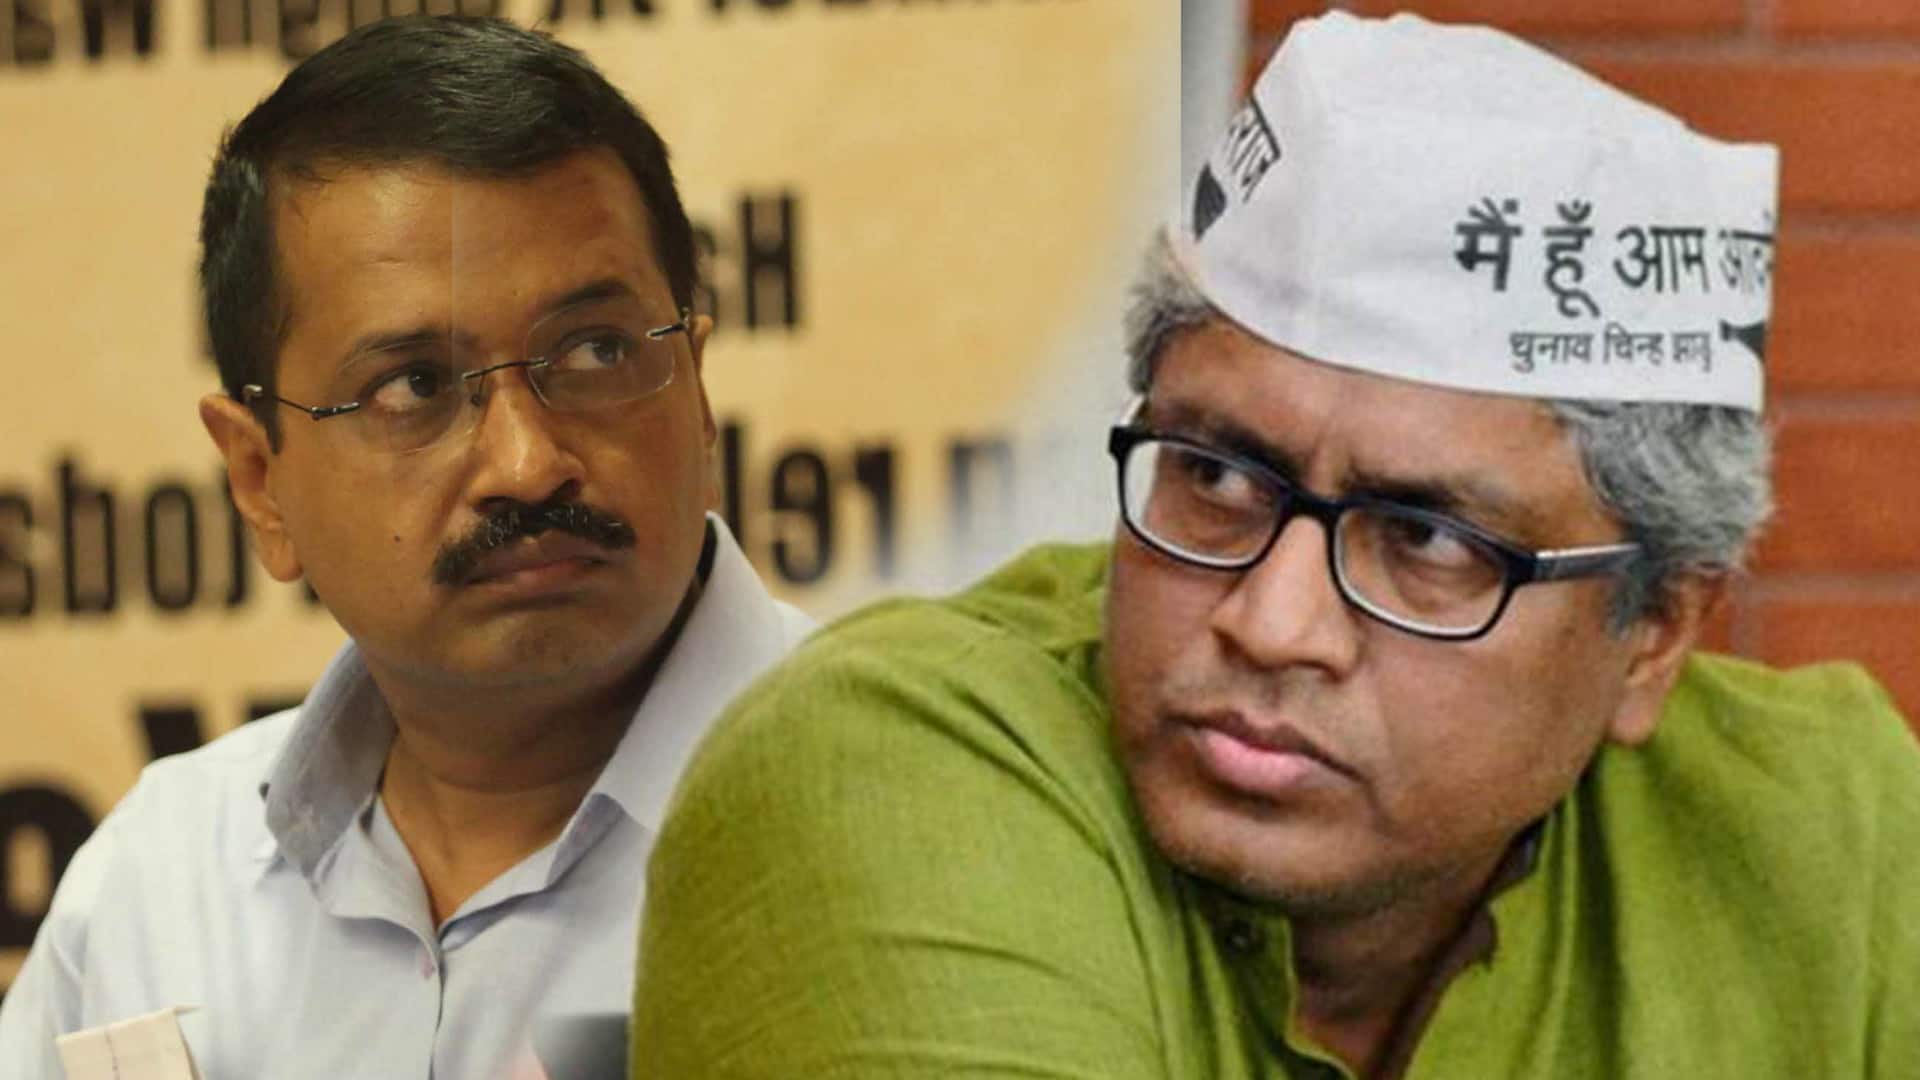 Ashutosh quits AAP Arvind Kejriwal rejects resignation Freedom